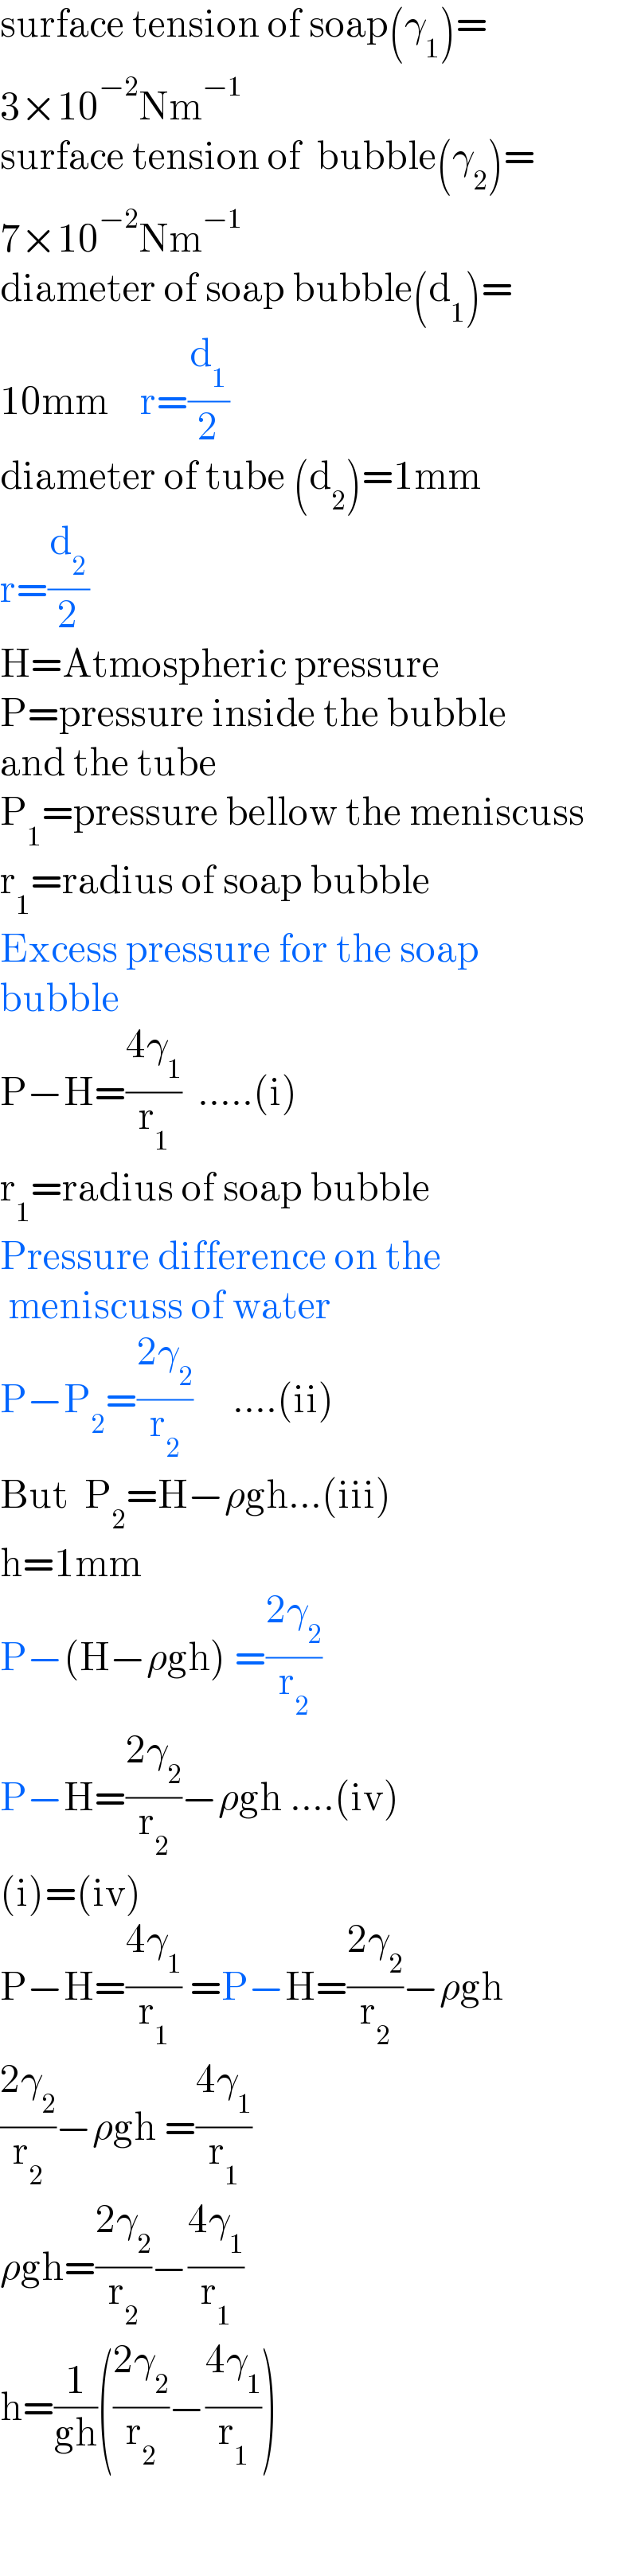 surface tension of soap(γ_1 )=  3×10^(−2) Nm^(−1)   surface tension of  bubble(γ_2 )=  7×10^(−2) Nm^(−1)   diameter of soap bubble(d_1 )=  10mm    r=(d_1 /2)  diameter of tube (d_2 )=1mm  r=(d_2 /2)  H=Atmospheric pressure  P=pressure inside the bubble  and the tube  P_1 =pressure bellow the meniscuss  r_1 =radius of soap bubble  Excess pressure for the soap  bubble  P−H=((4γ_1 )/r_1 )  .....(i)  r_1 =radius of soap bubble  Pressure difference on the   meniscuss of water  P−P_2 =((2γ_2 )/r_2 )     ....(ii)  But  P_2 =H−ρgh...(iii)  h=1mm  P−(H−ρgh) =((2γ_2 )/r_2 )     P−H=((2γ_2 )/r_2 )−ρgh ....(iv)  (i)=(iv)  P−H=((4γ_1 )/r_1 ) =P−H=((2γ_2 )/r_2 )−ρgh   ((2γ_2 )/r_2 )−ρgh =((4γ_1 )/r_1 )  ρgh=((2γ_2 )/r_2 )−((4γ_1 )/r_1 )  h=(1/(gh))(((2γ_2 )/r_2 )−((4γ_1 )/r_1 ))    